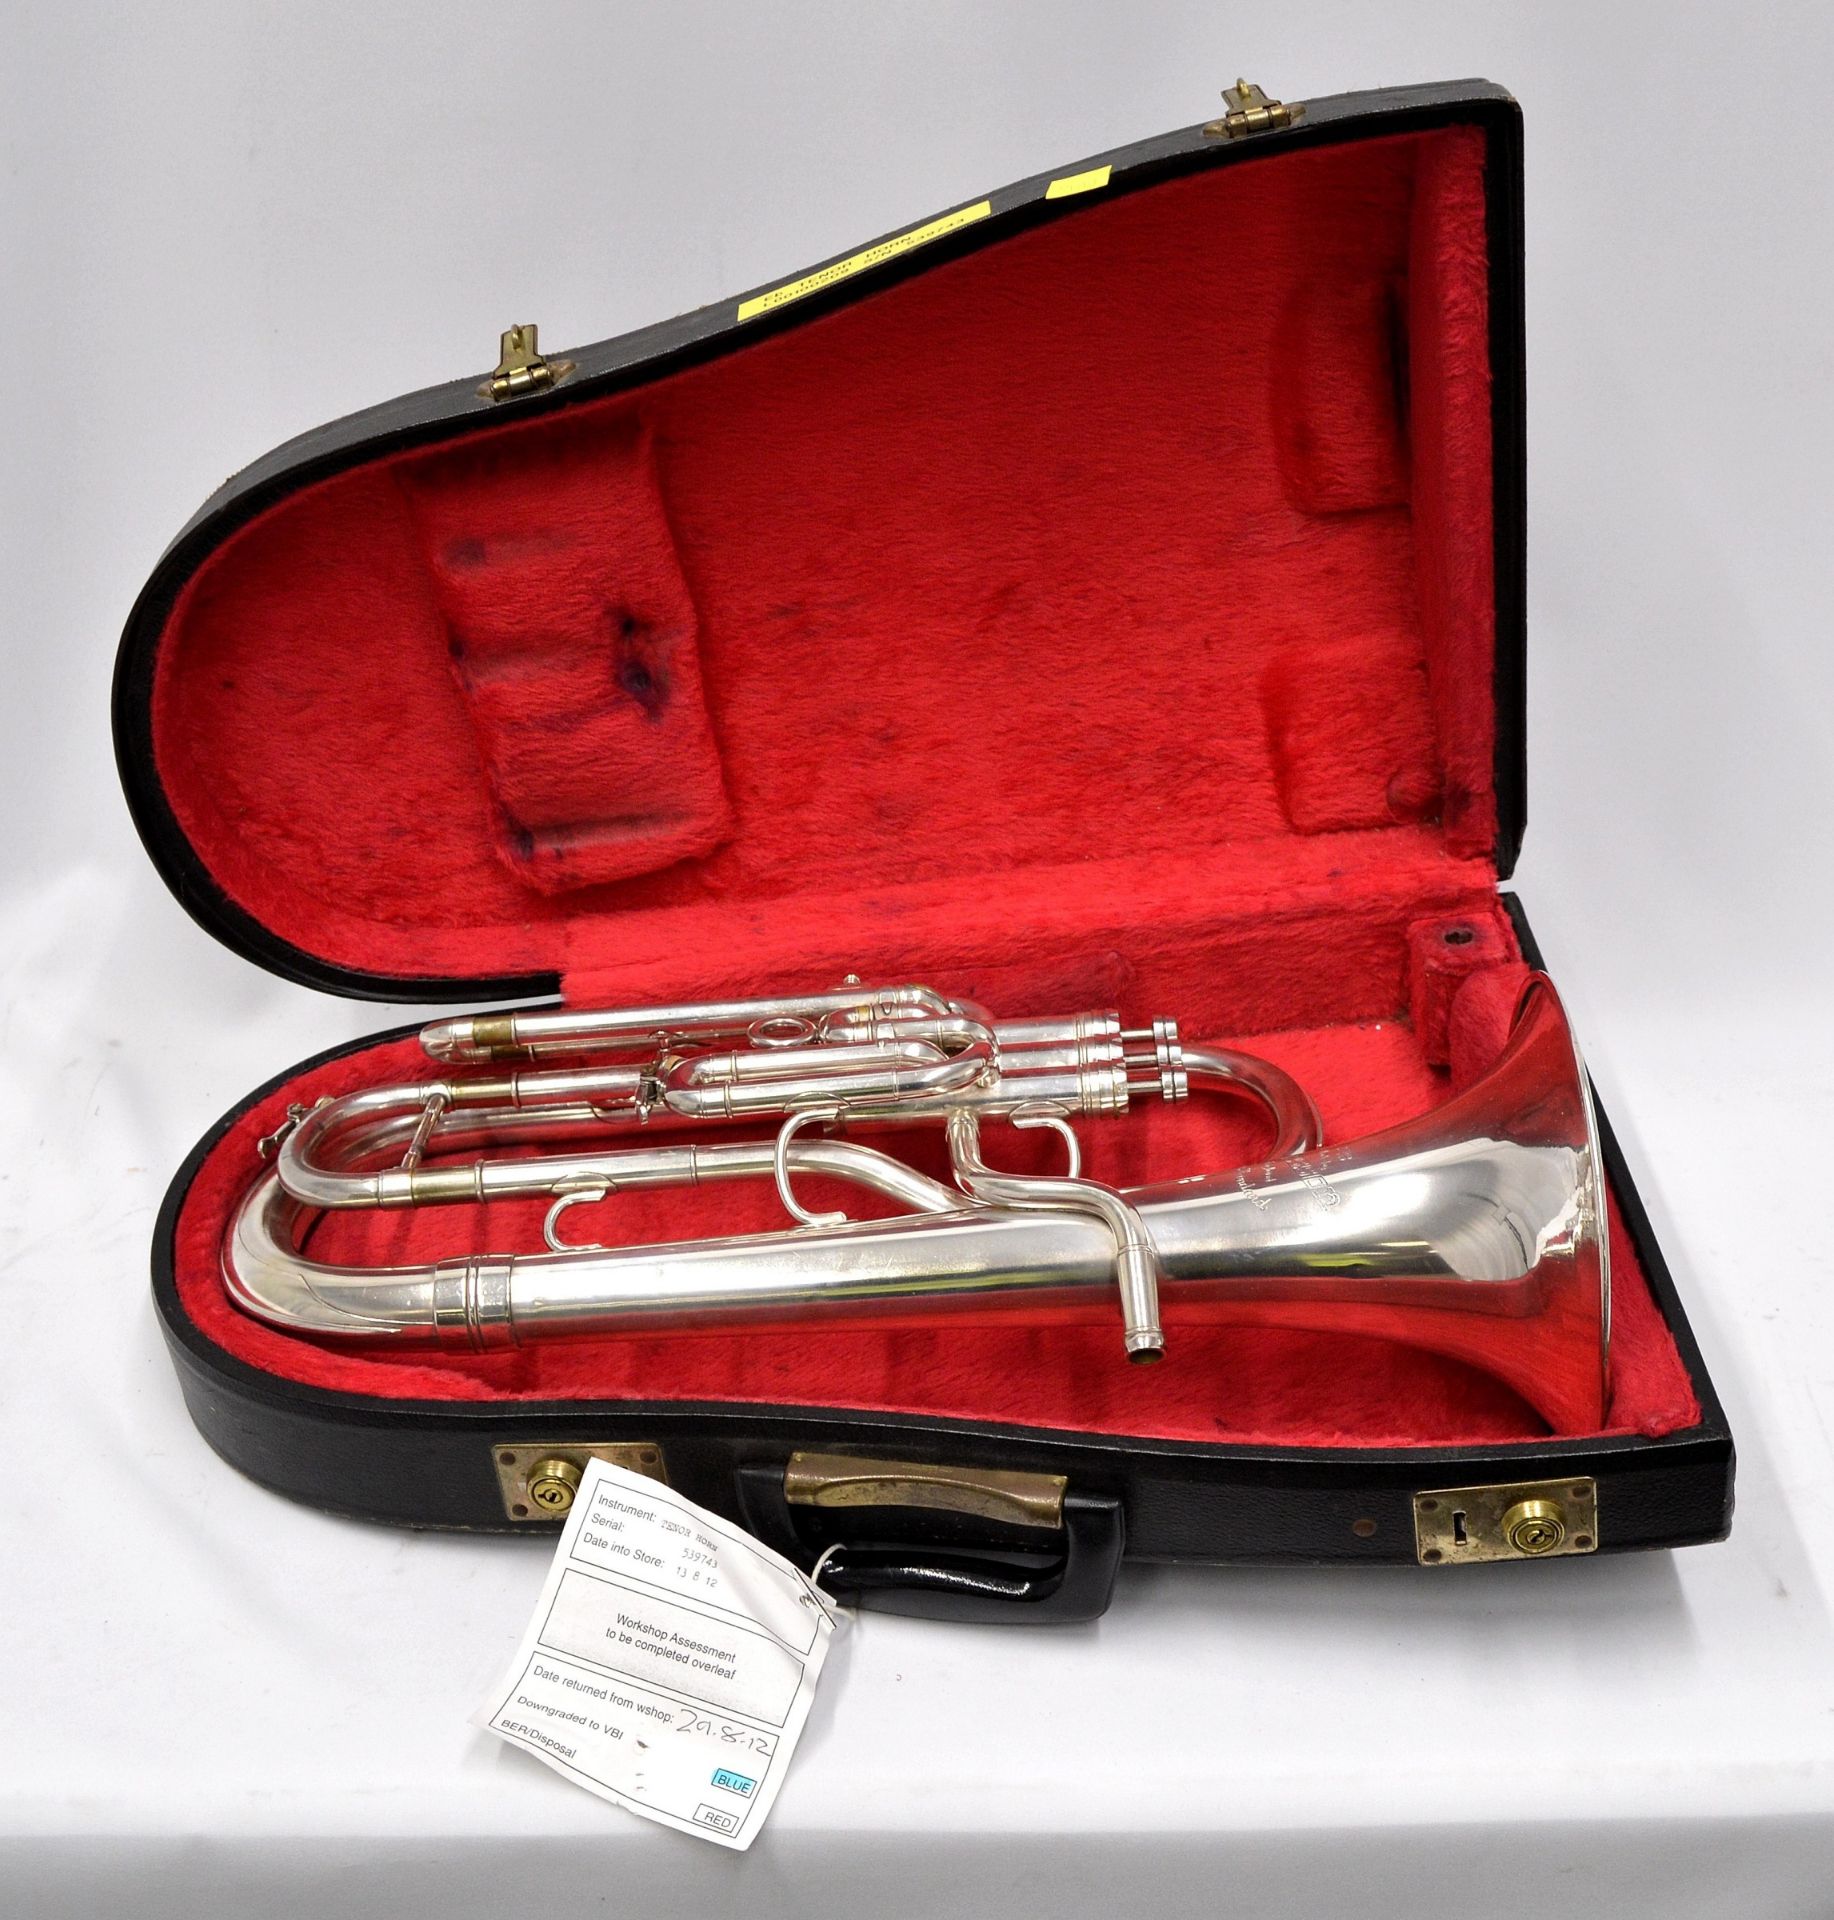 Besson Tenor Horn with Case. Serial No. 539743.